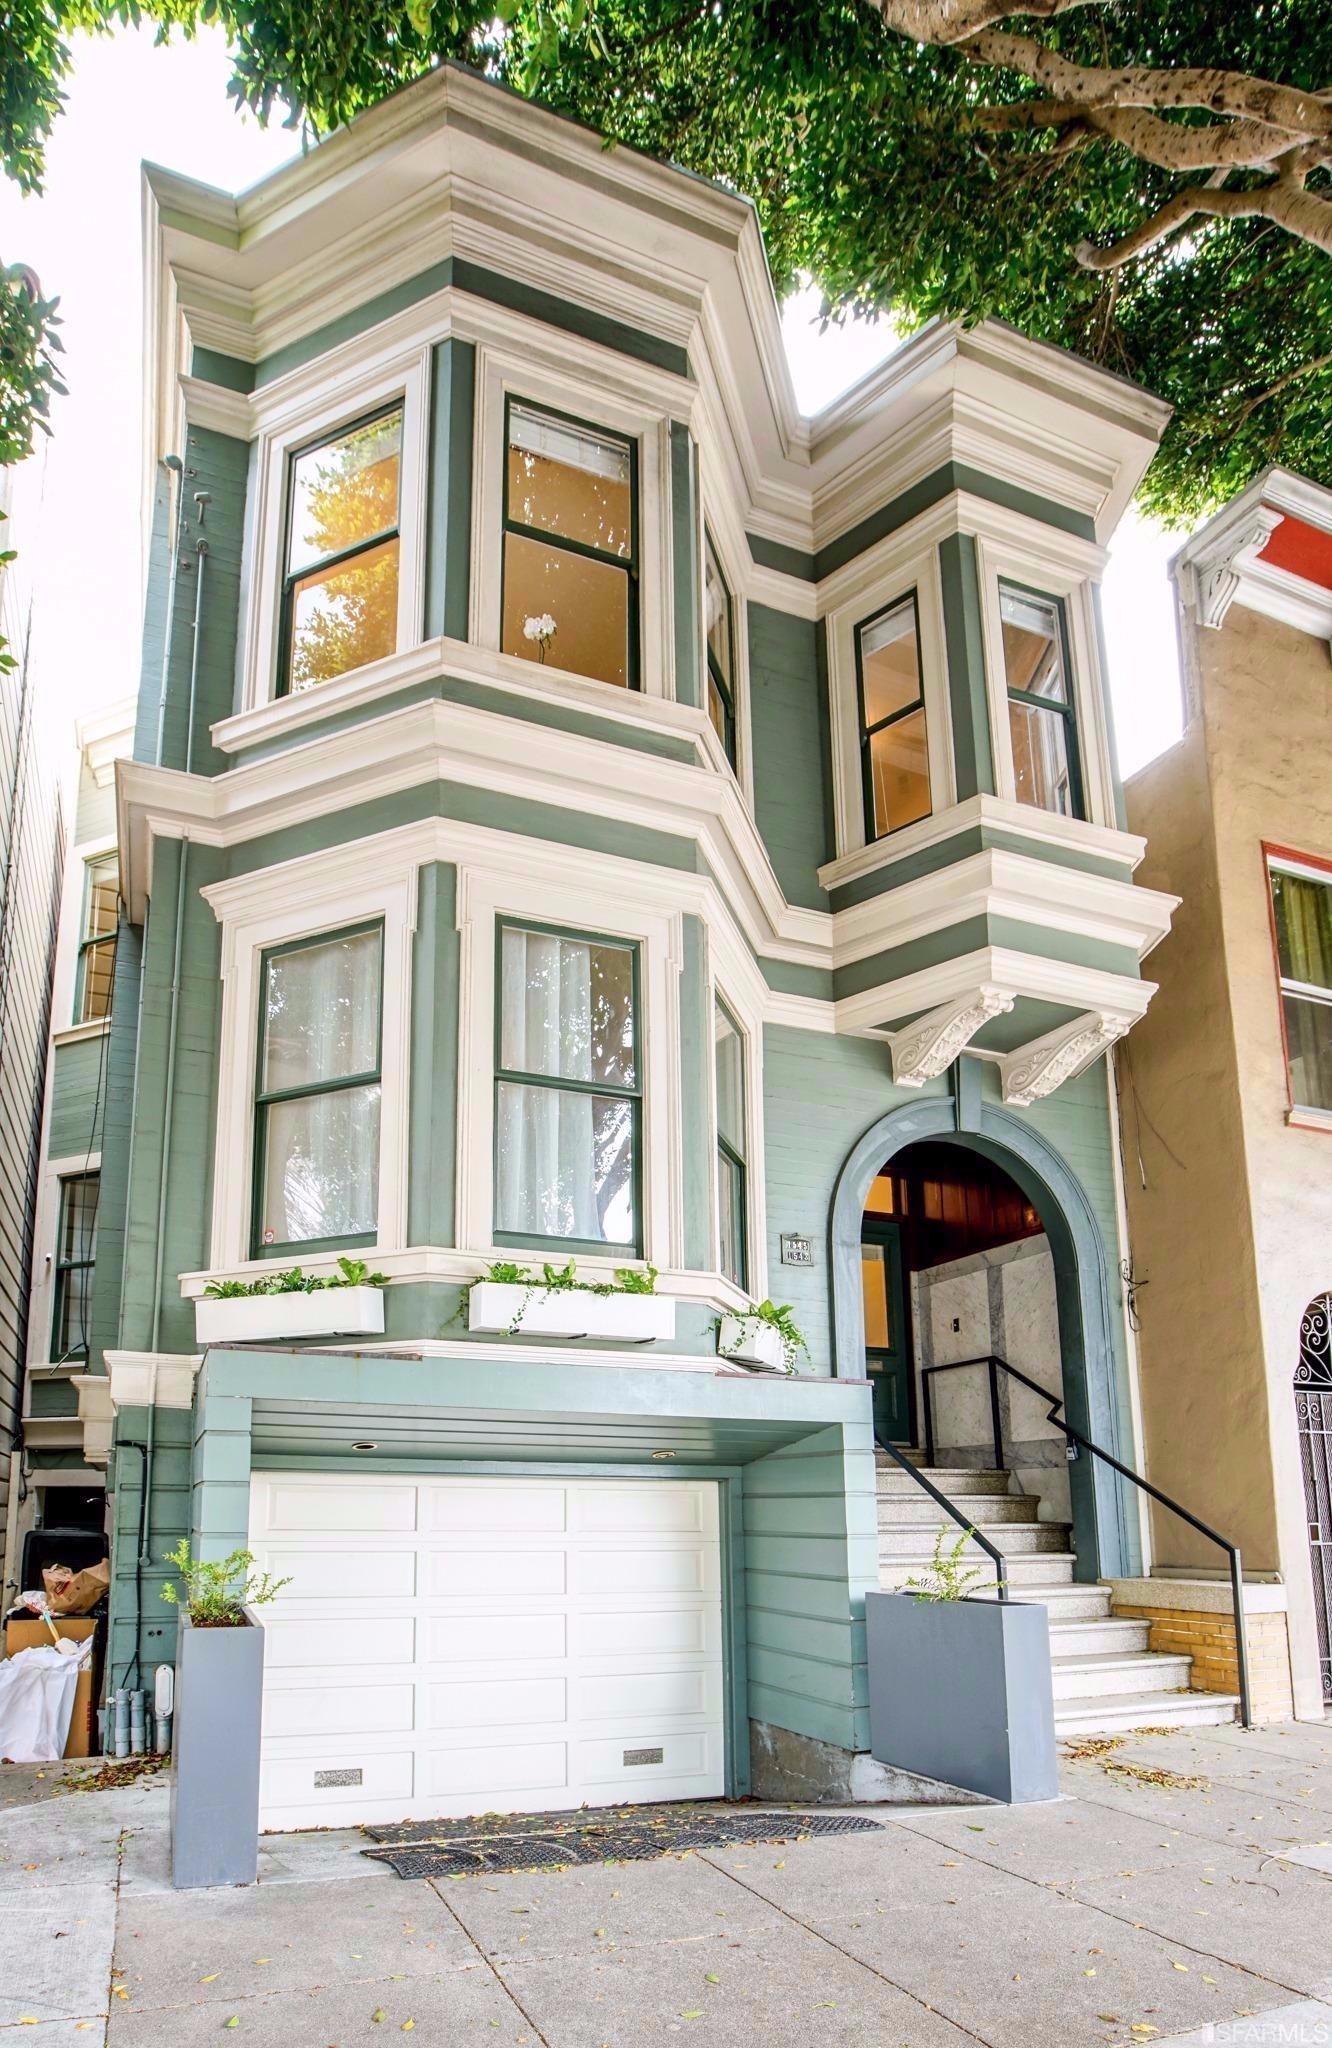 Welcome to 1545 Dolores!  Located on a flat block, this condo is easily walkable and close to all the great retail that Noe Valley has to offer.